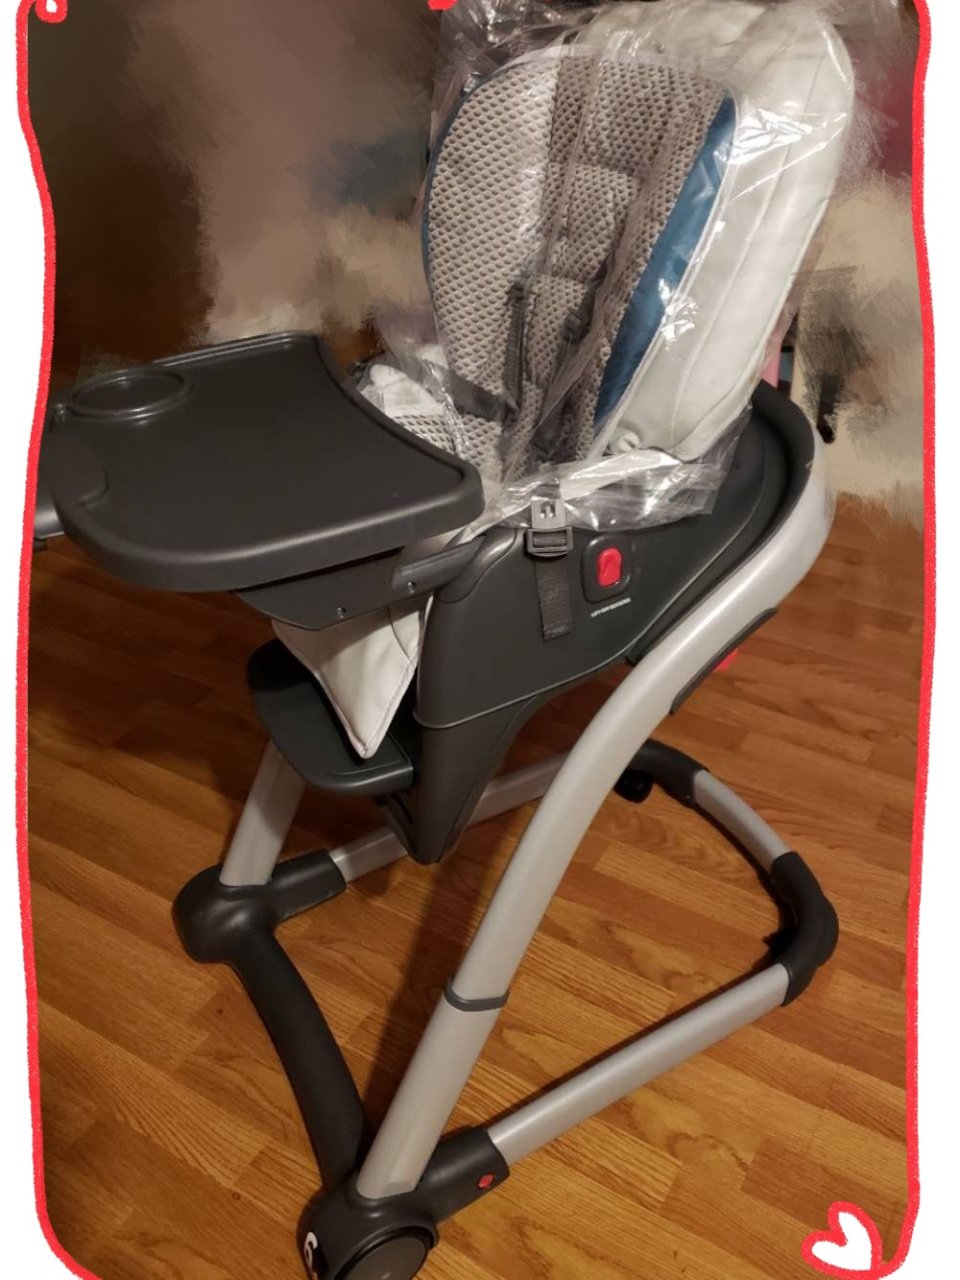 Graco Blossom 6-in-1 Convertible highchair